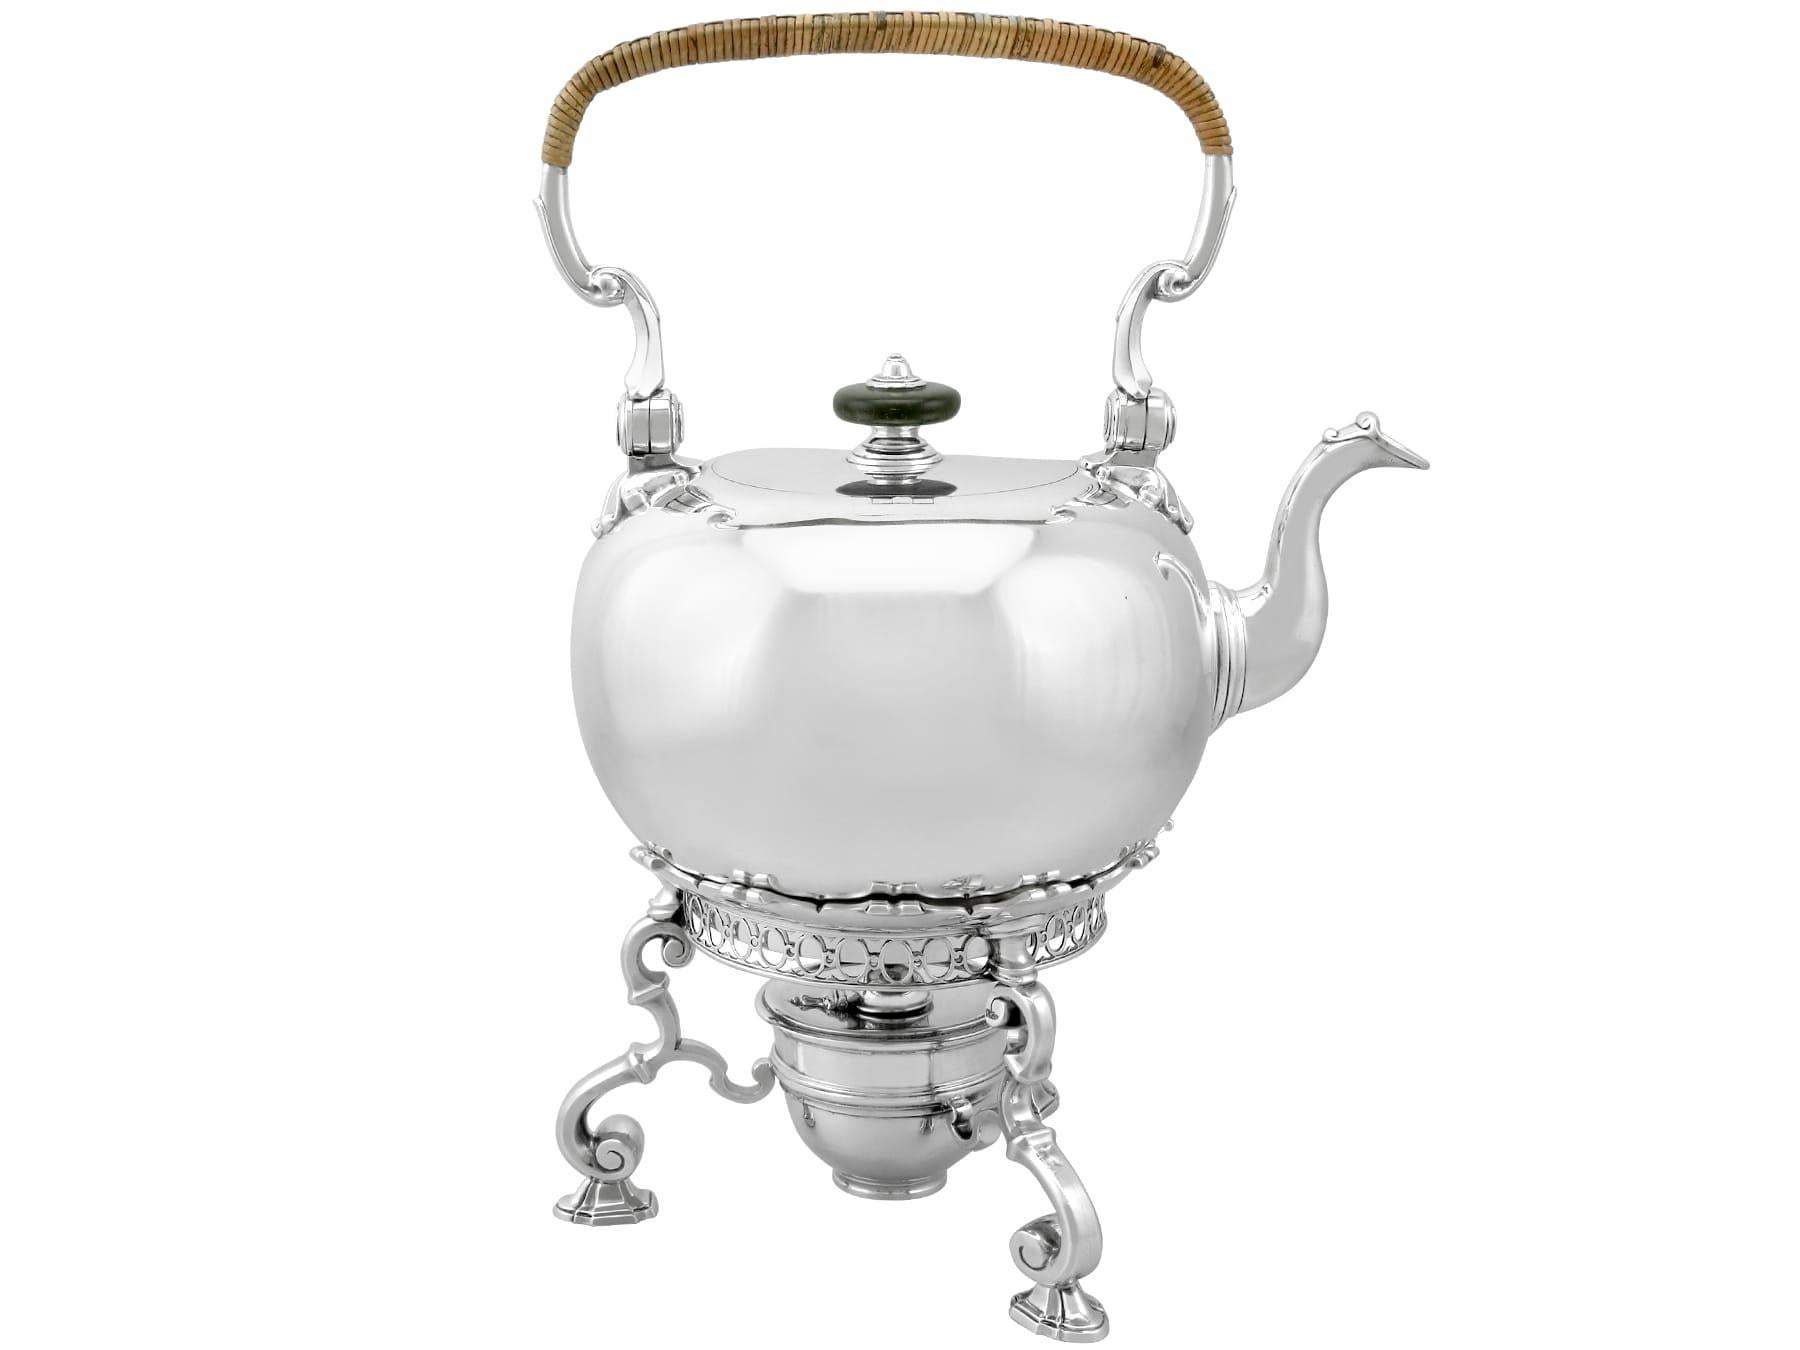 This magnificent and impressive antique Georgian sterling silver spirit kettle has a circular rounded form.
The surface of the Georgian silver kettle is plain and embellished with a contemporary engraved coat of arms encompassed with a scrolling